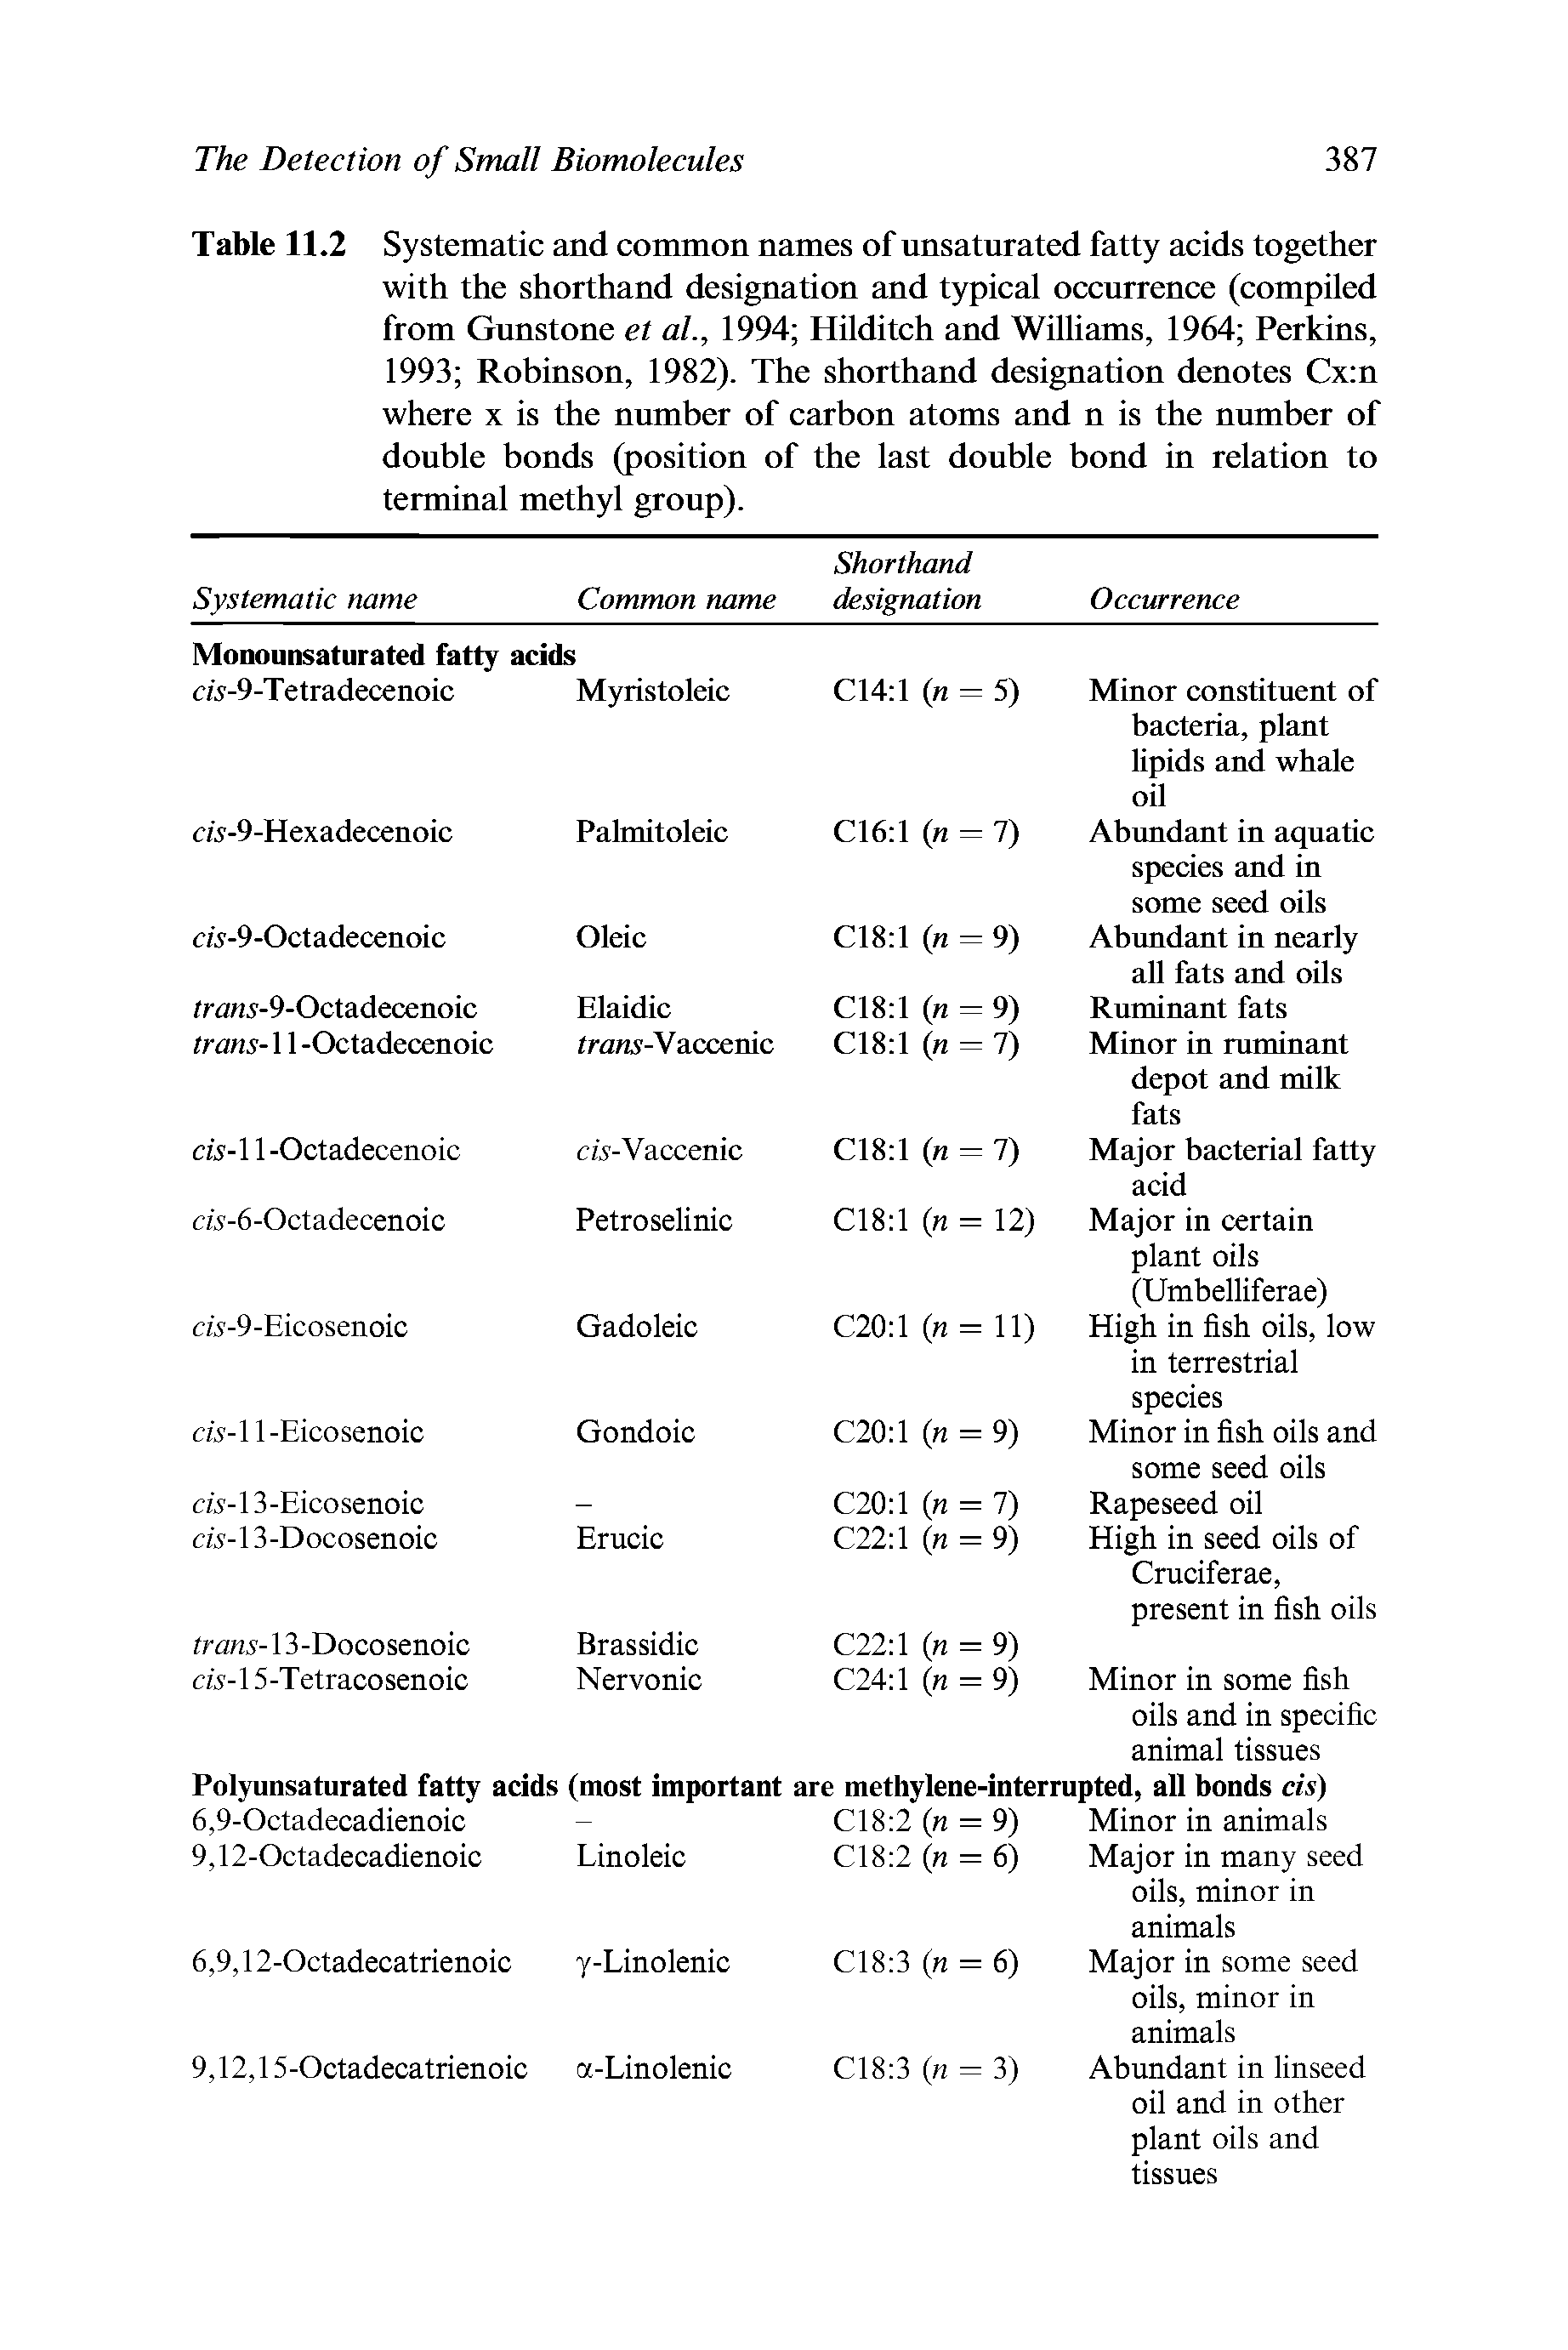 Table 11.2 Systematic and common names of unsaturated fatty acids together with the shorthand designation and typical occurrence (compiled from Gunstone et al., 1994 Hilditch and Williams, 1964 Perkins, 1993 Robinson, 1982). The shorthand designation denotes Cx n where x is the number of carbon atoms and n is the number of double bonds (position of the last double bond in relation to terminal methyl group).